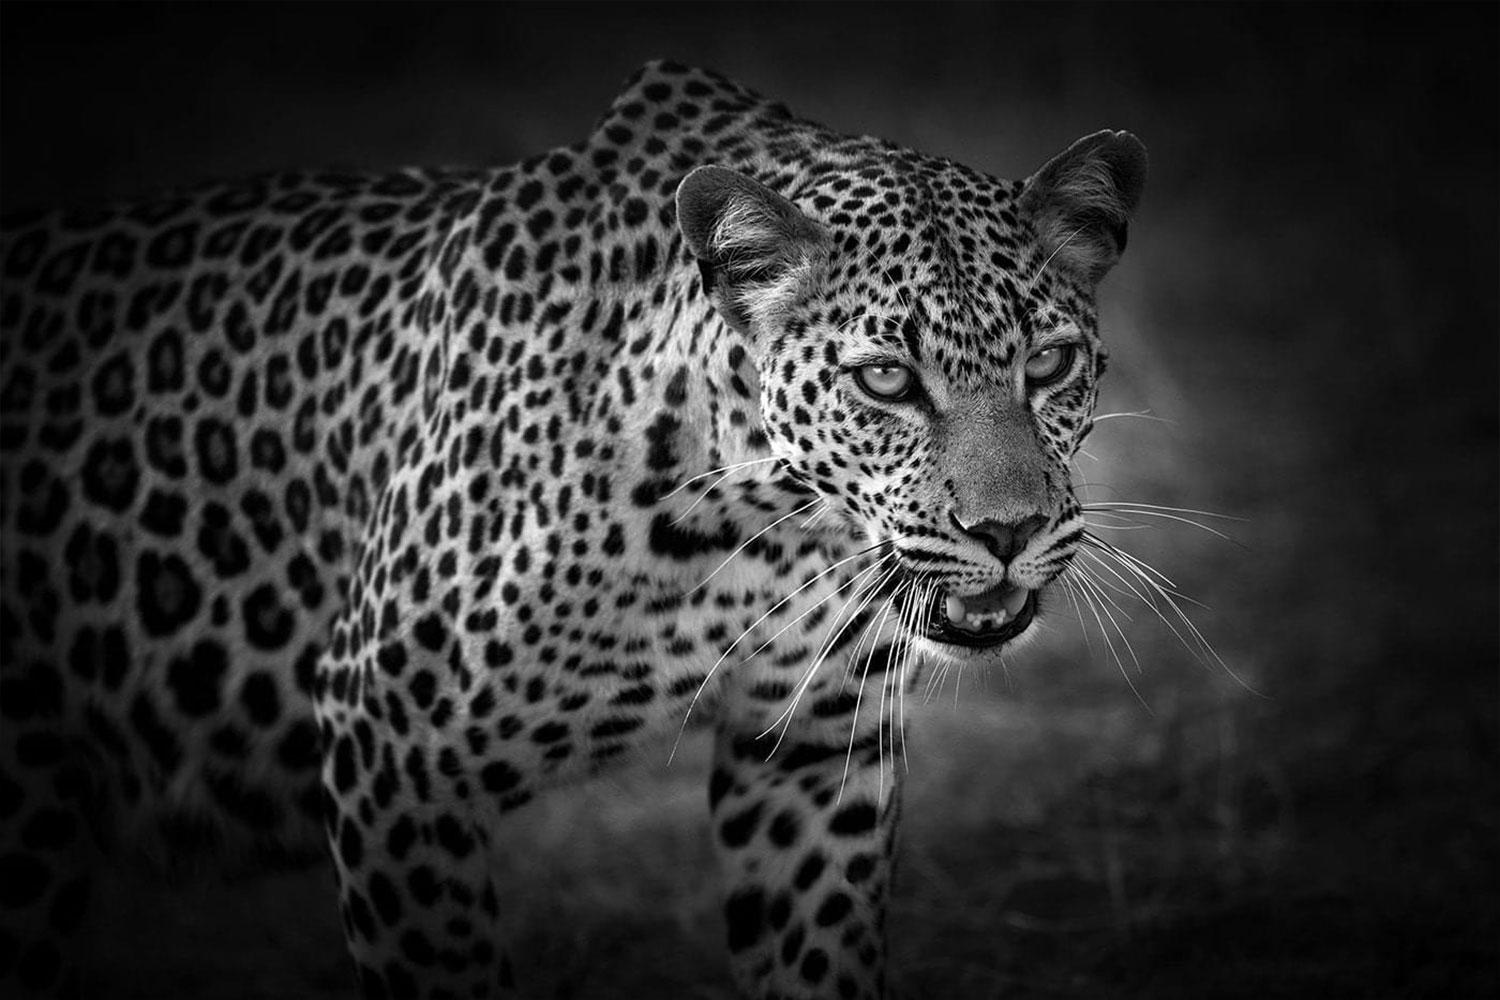 Björn Persson Black and White Photograph - Queen of Africa Northern Conservancy, Kenya